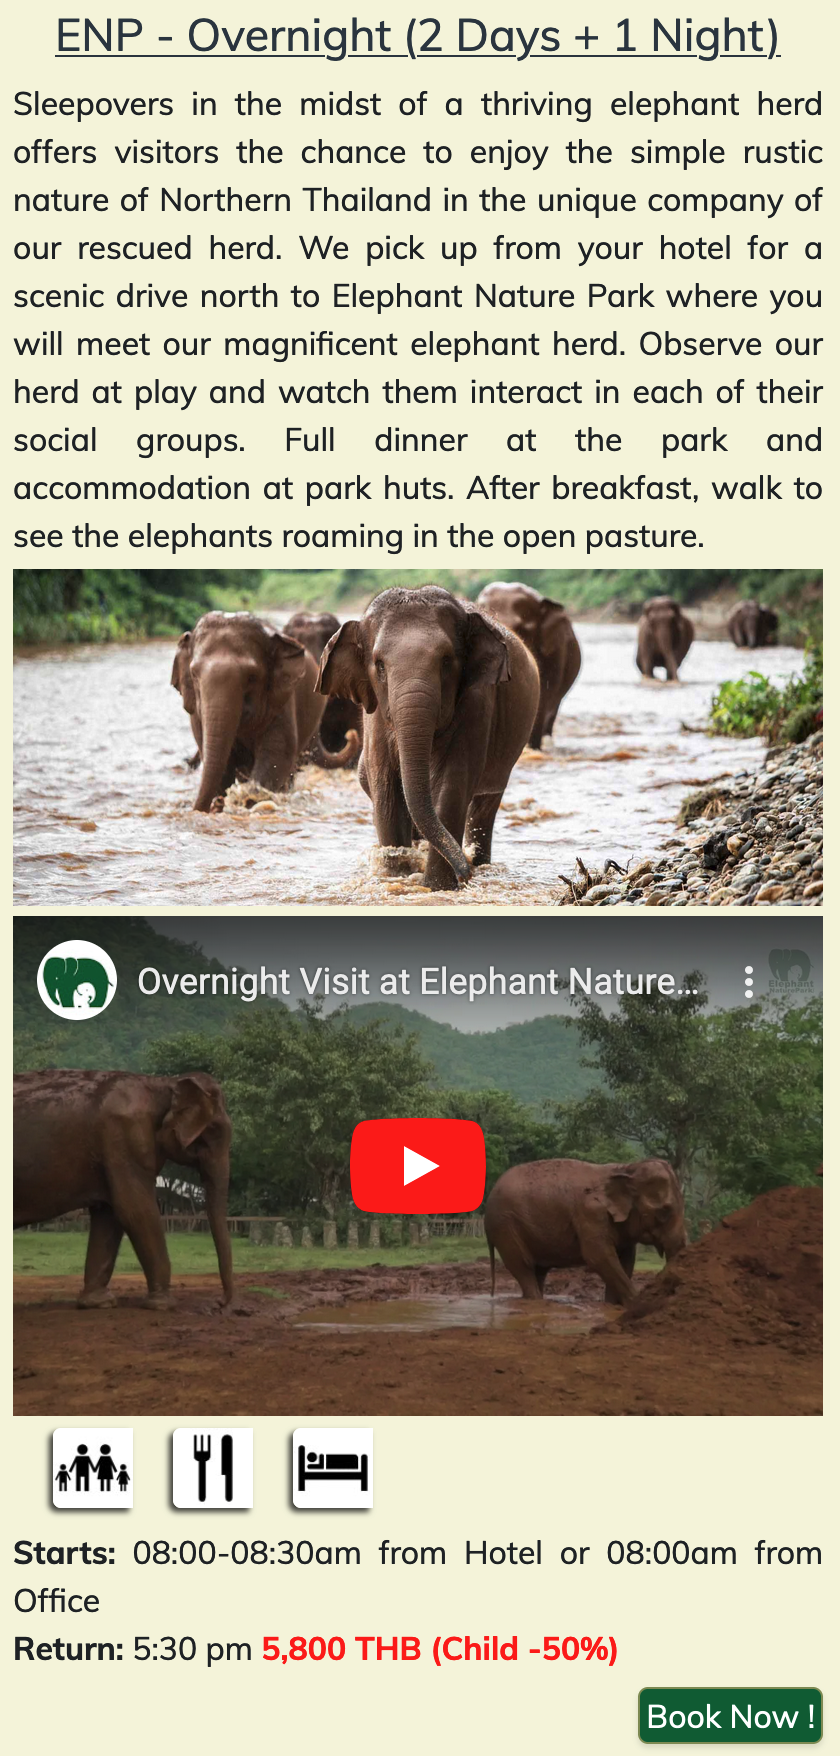 ENP - Overnight (2 Days + 1 Night) Sleepovers in the midst of a thriving elephant herd offers visitors the chance to enjoy the simple rustic nature of Northern Thailand in the unique company of our rescued herd. We pick up from your hotel for a scenic drive north to Elephant Nature Park where you will meet our magnificent elephant herd. Observe our herd at play and watch them interact in each of their social groups. Full dinner at the park and accommodation at park huts. After breakfast, walk to see the elephants roaming in the open pasture.